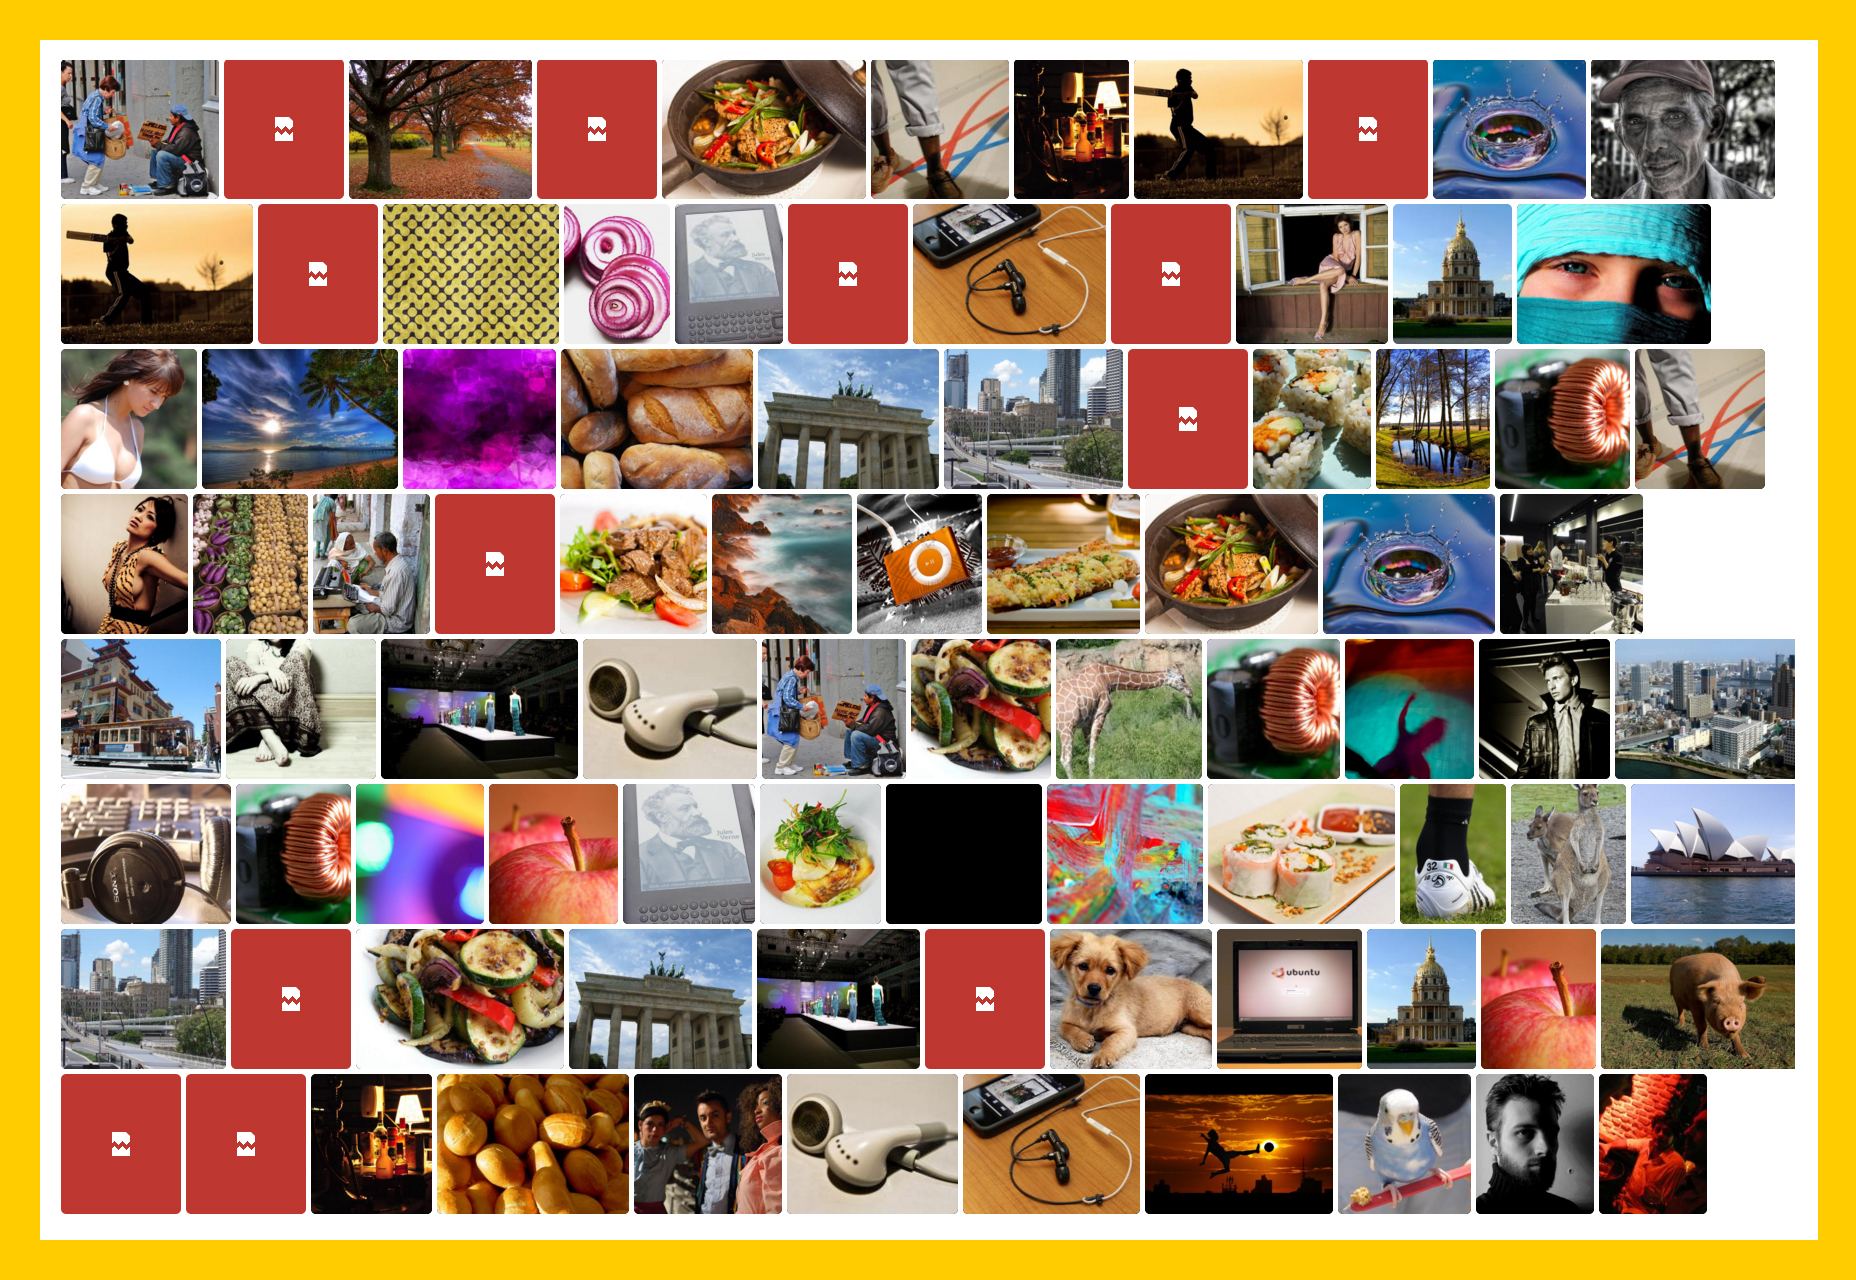 imagesloaded-javascript-image-load-consultor-library